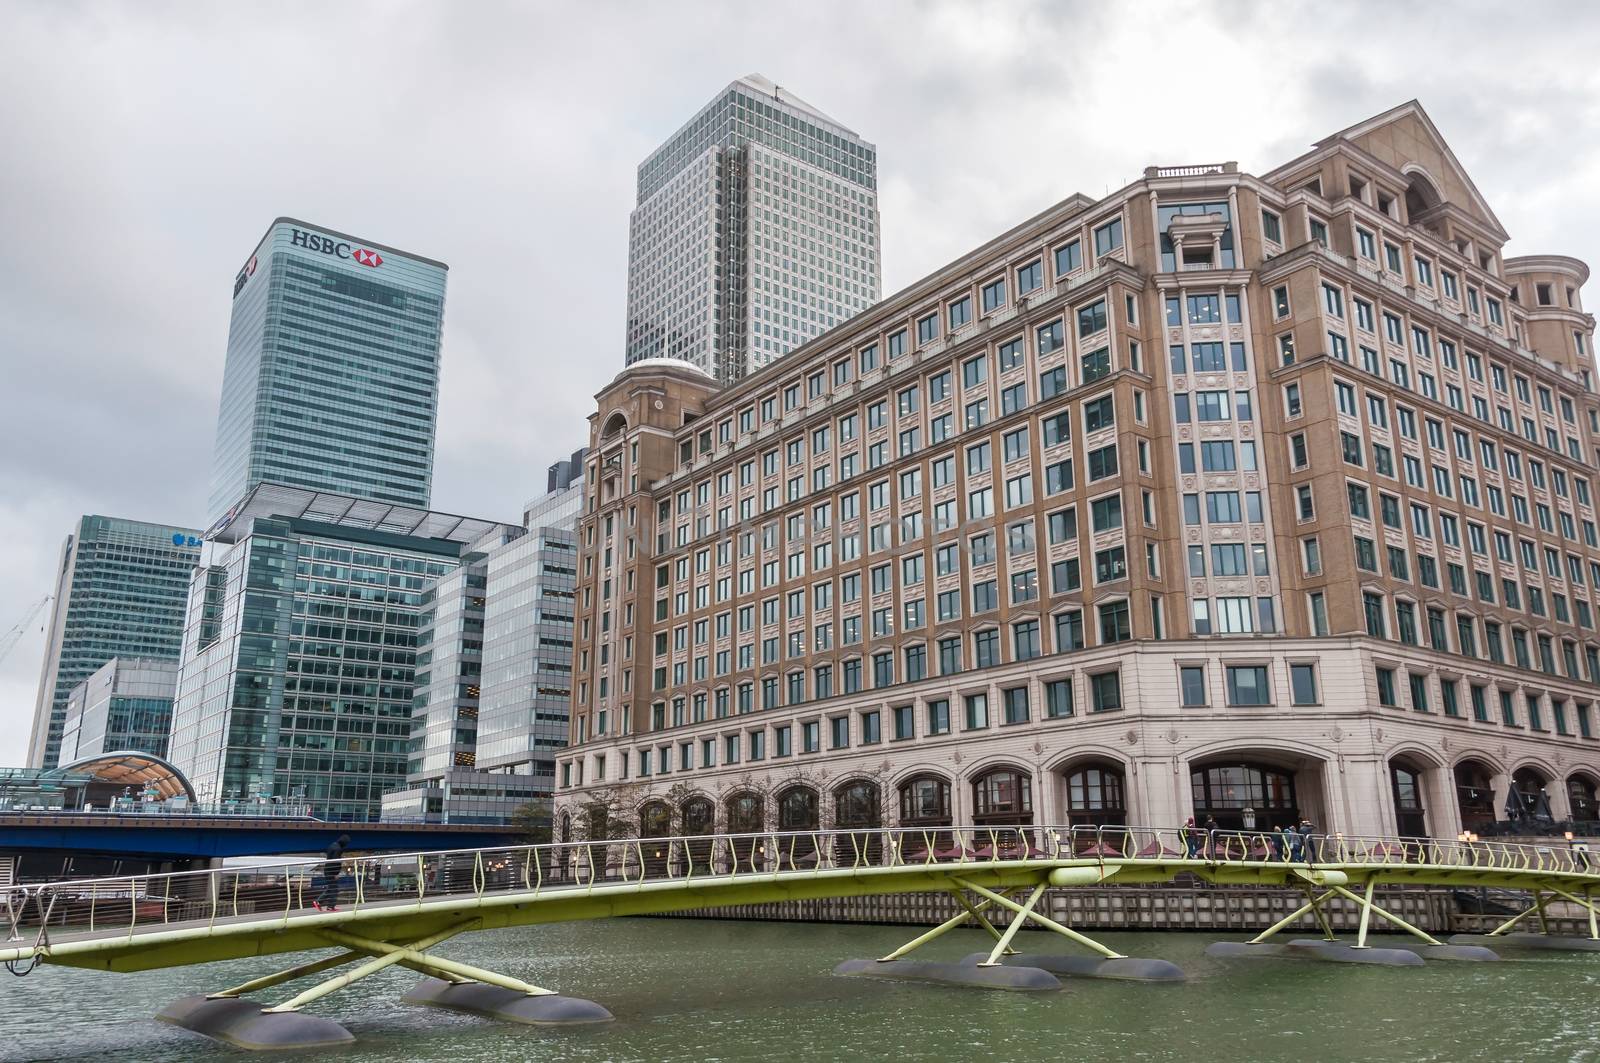 LONDON, UNITED KINGDOM - NOVEMBER 8, 2014: Modern buildings in North Dock in London's docklands on a cloudy day. Canary Wharf is one of London's two main financial centres.